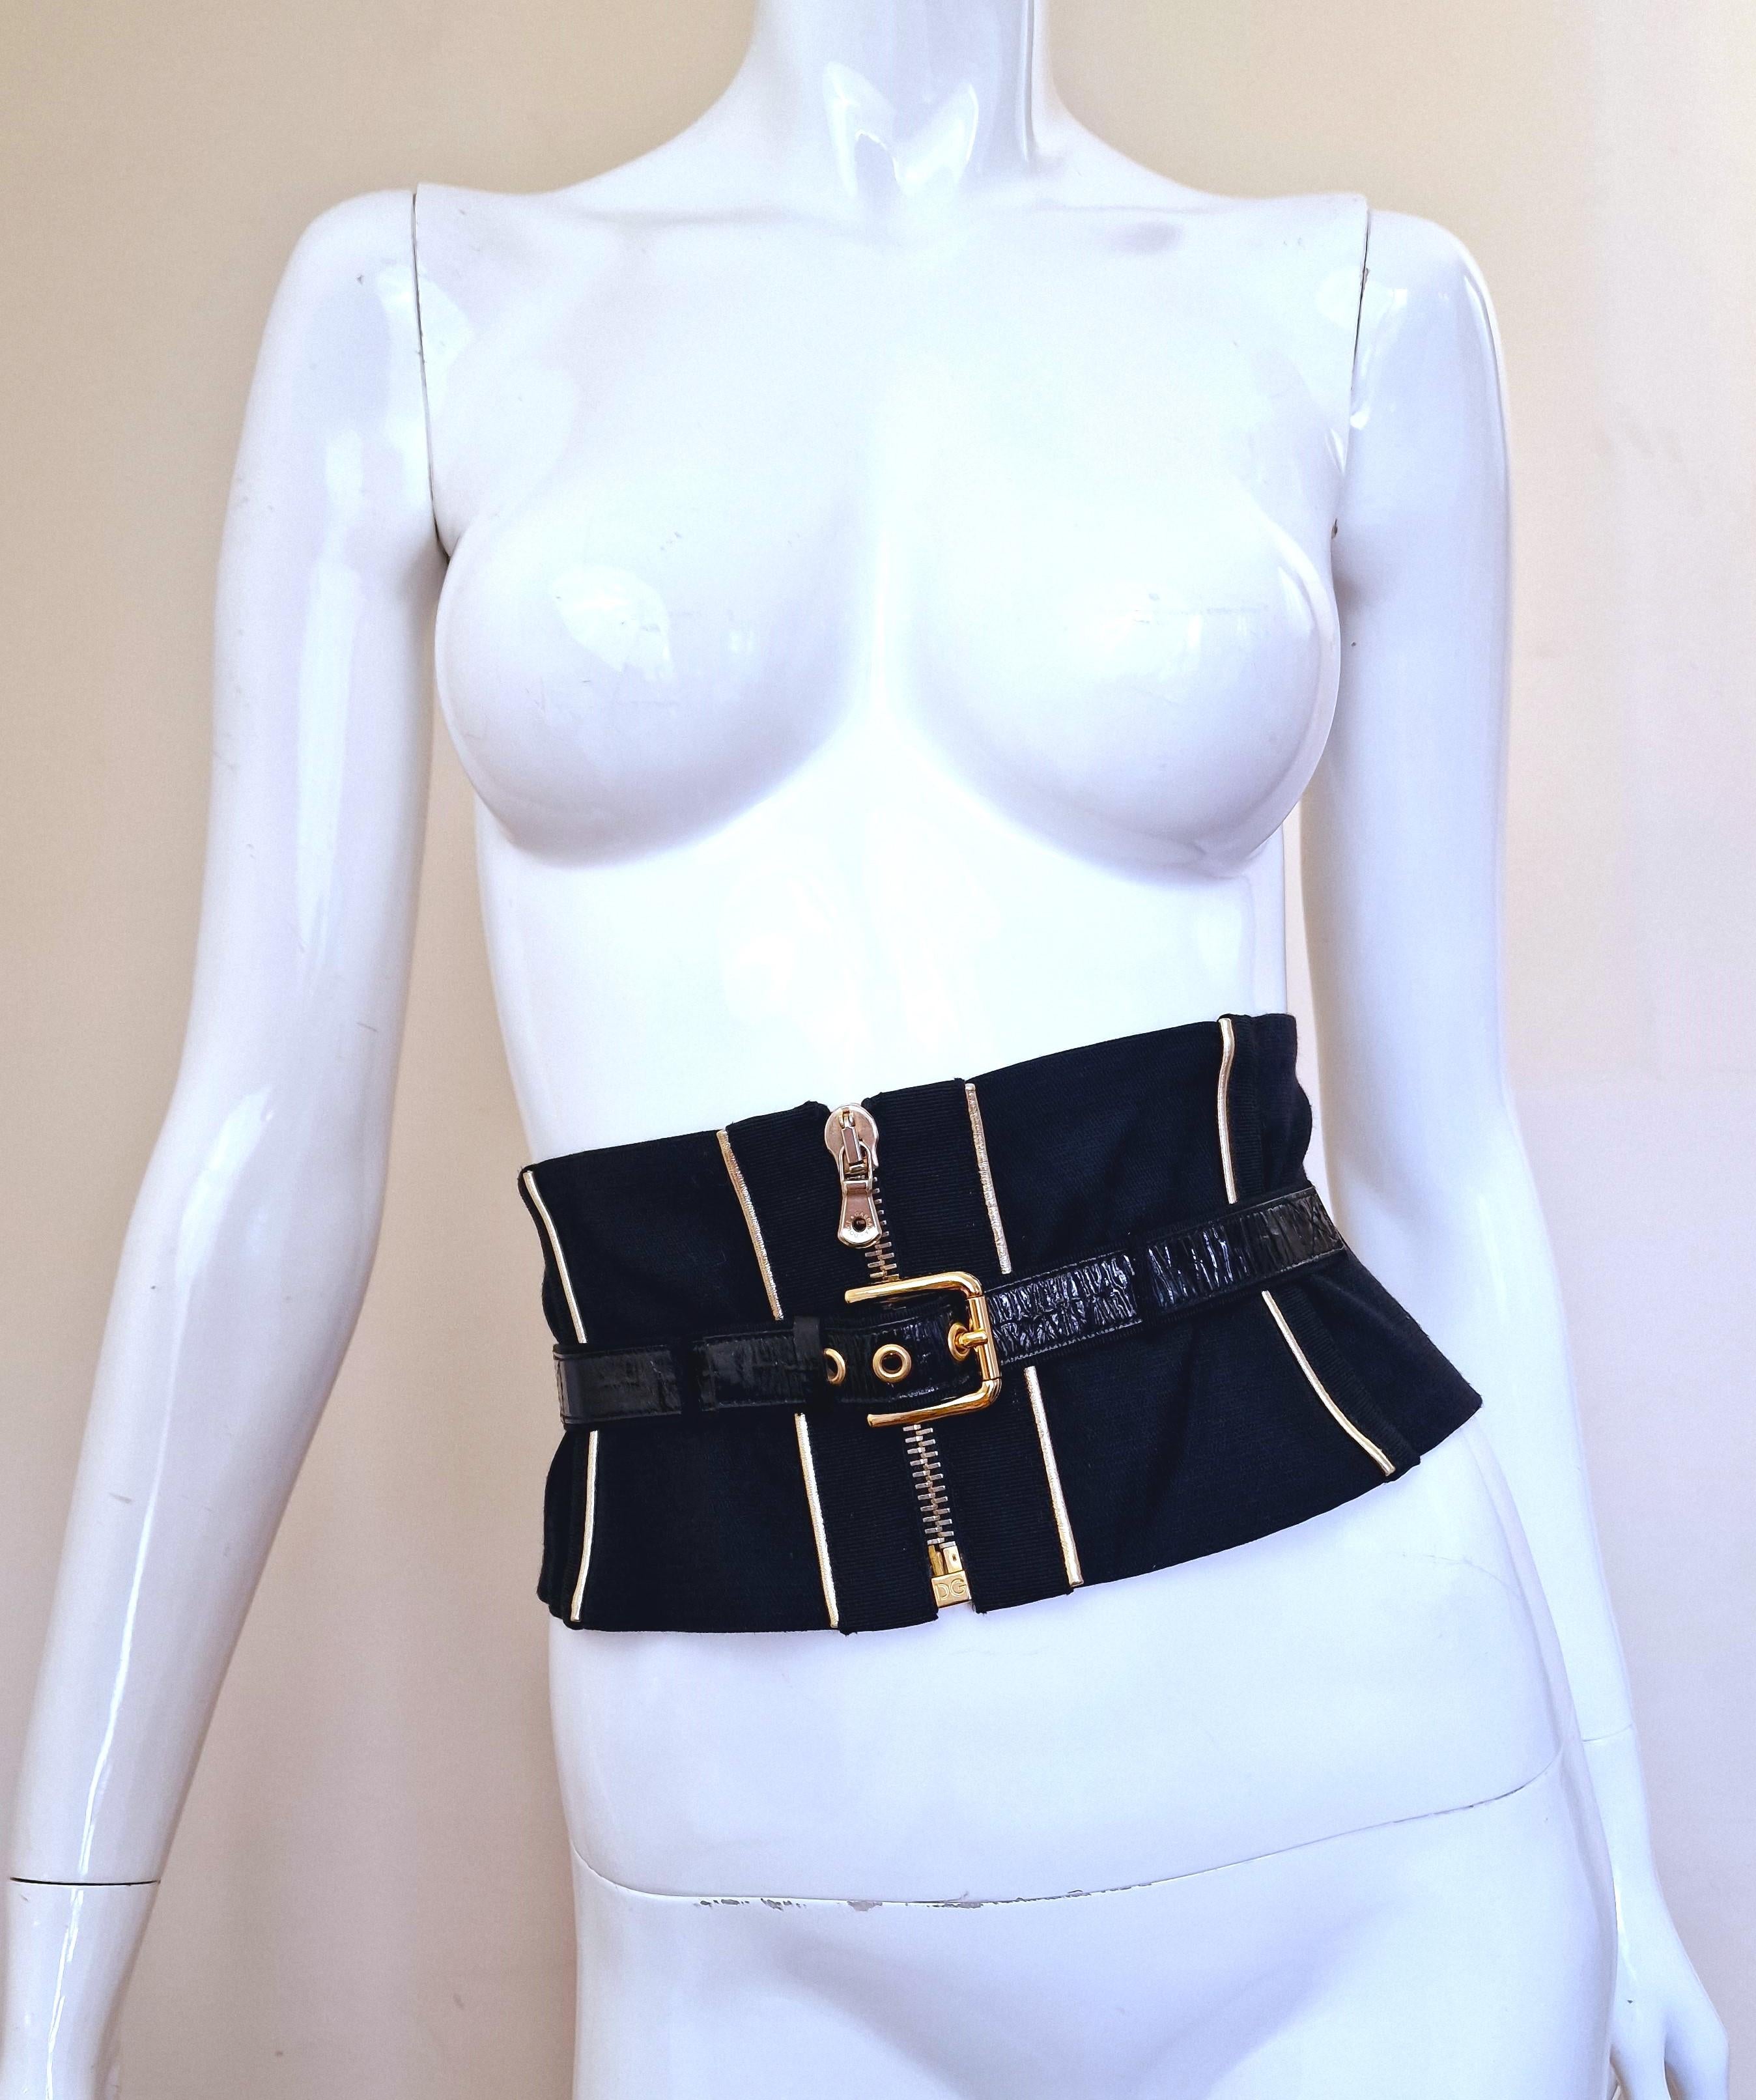 This corset belt by Dolce & Gabbana is crafted from a blend of fabrics that features a front zipper and gold hardware detailing, finished with a leather buckled belt and a lace-up detail at the rear.

Massive metal hardware zipper. 
Goatskin